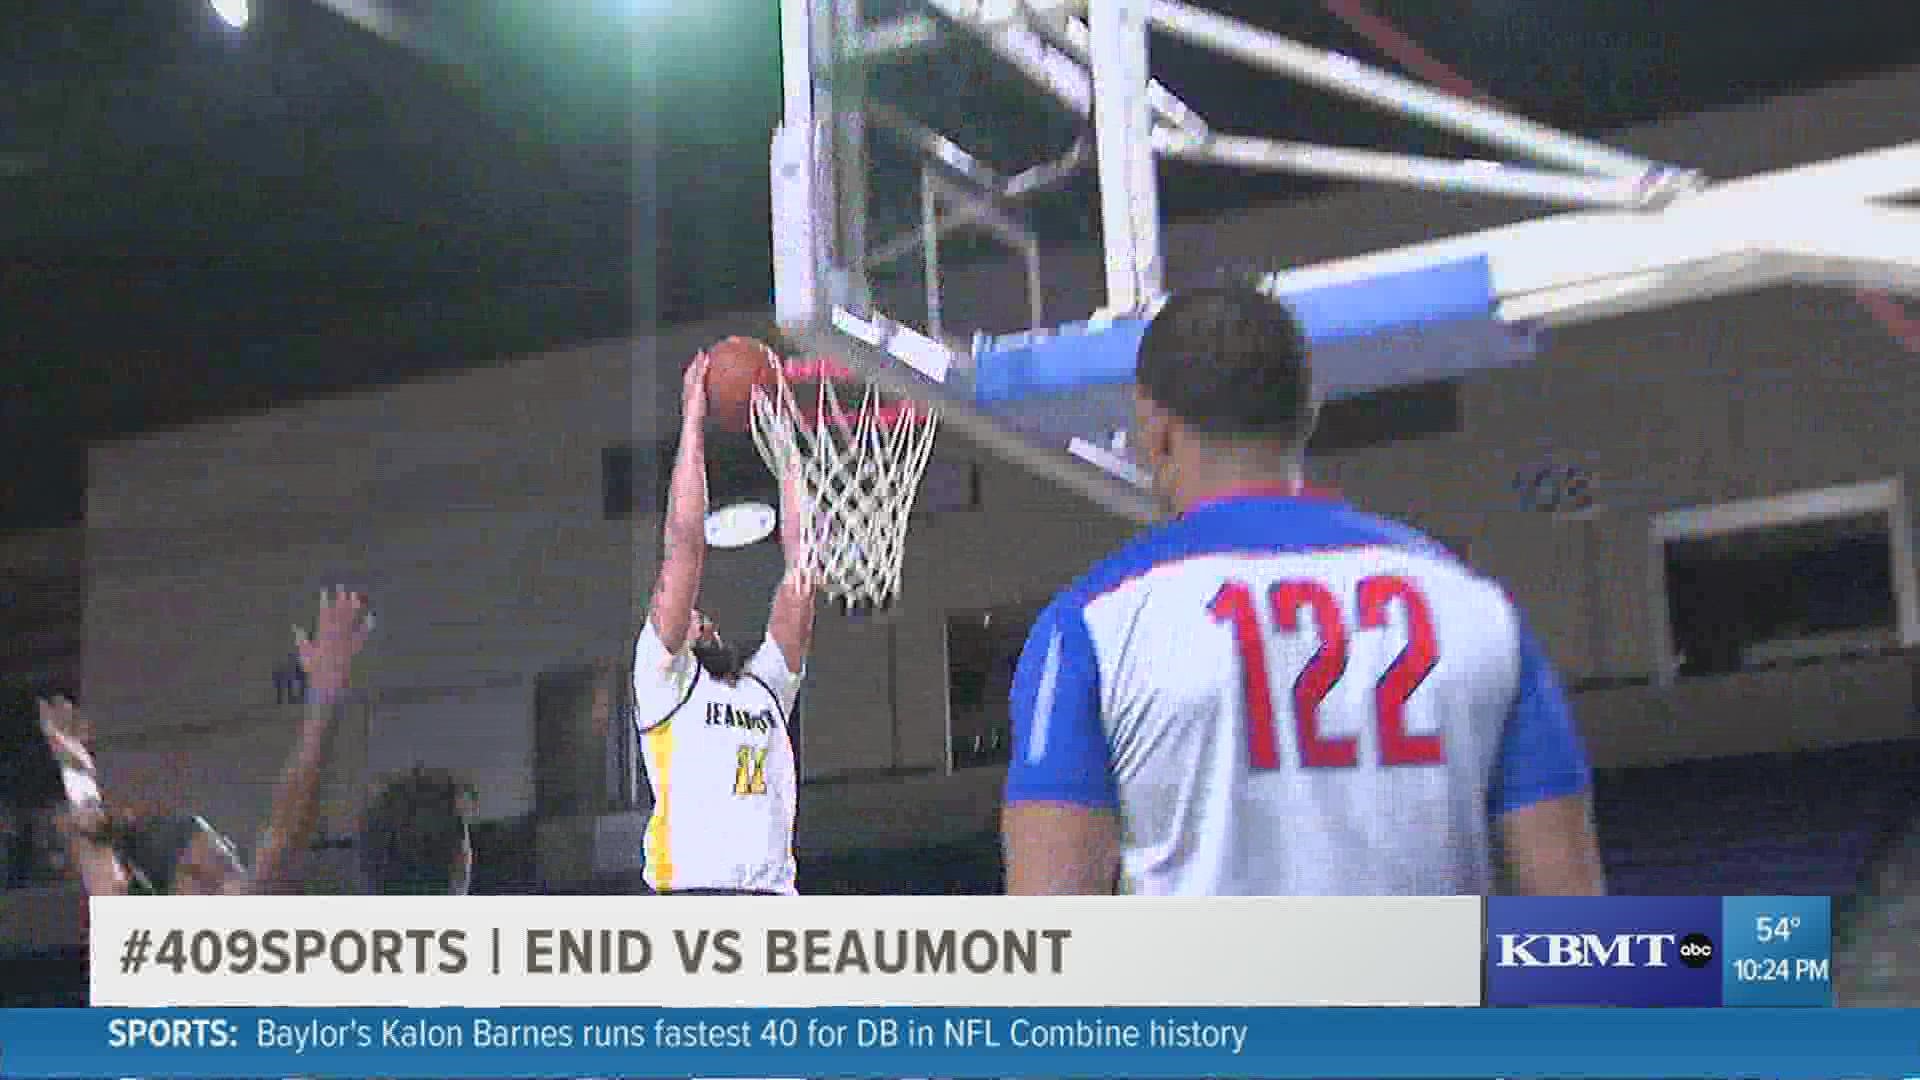 Beaumont Panthers fall in TBL debut to Enid